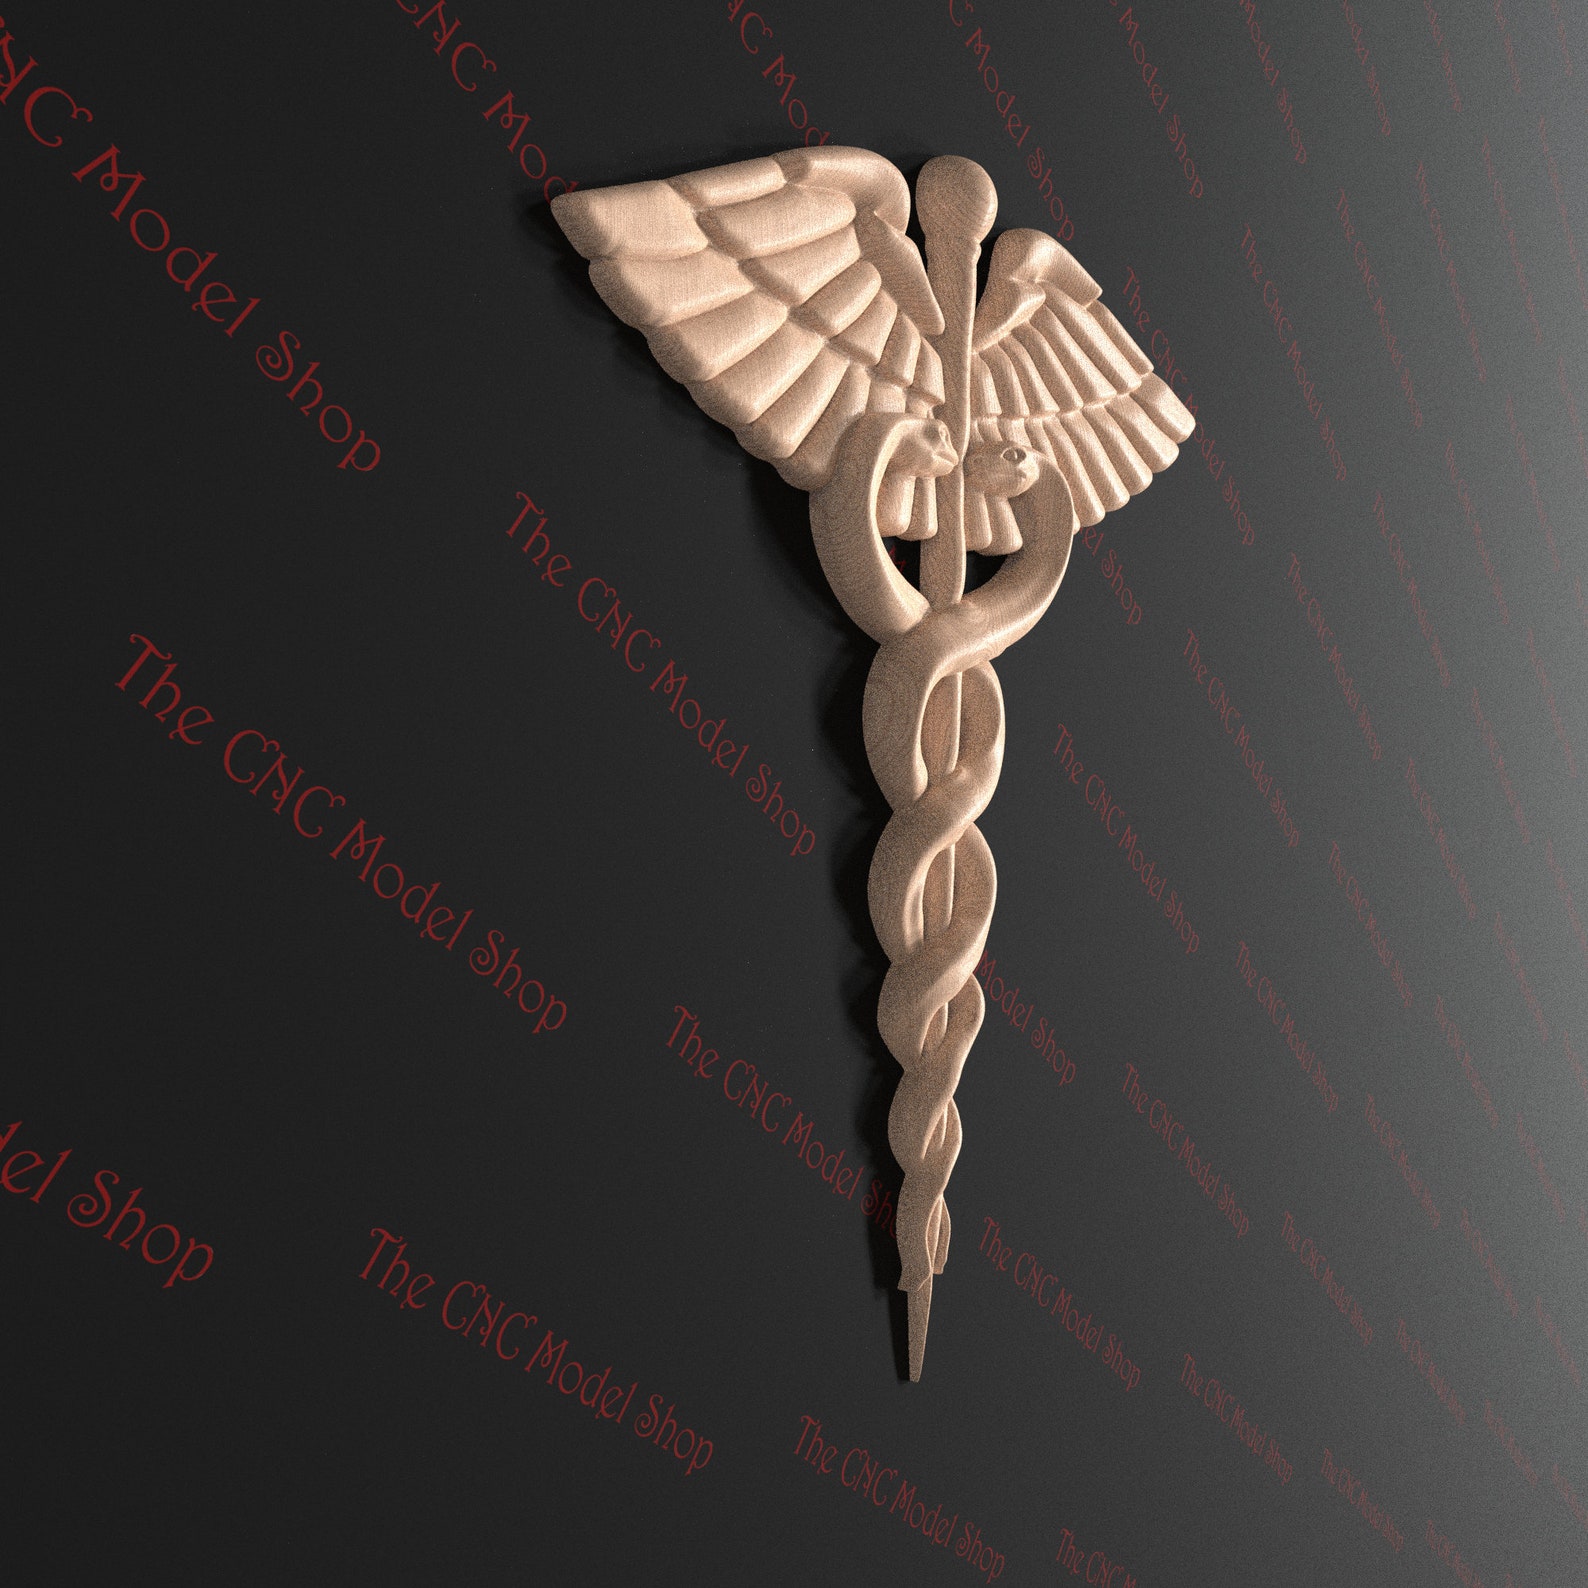 3D Relief STL File of Caduceus Symbol for CNC Router Carving - Etsy